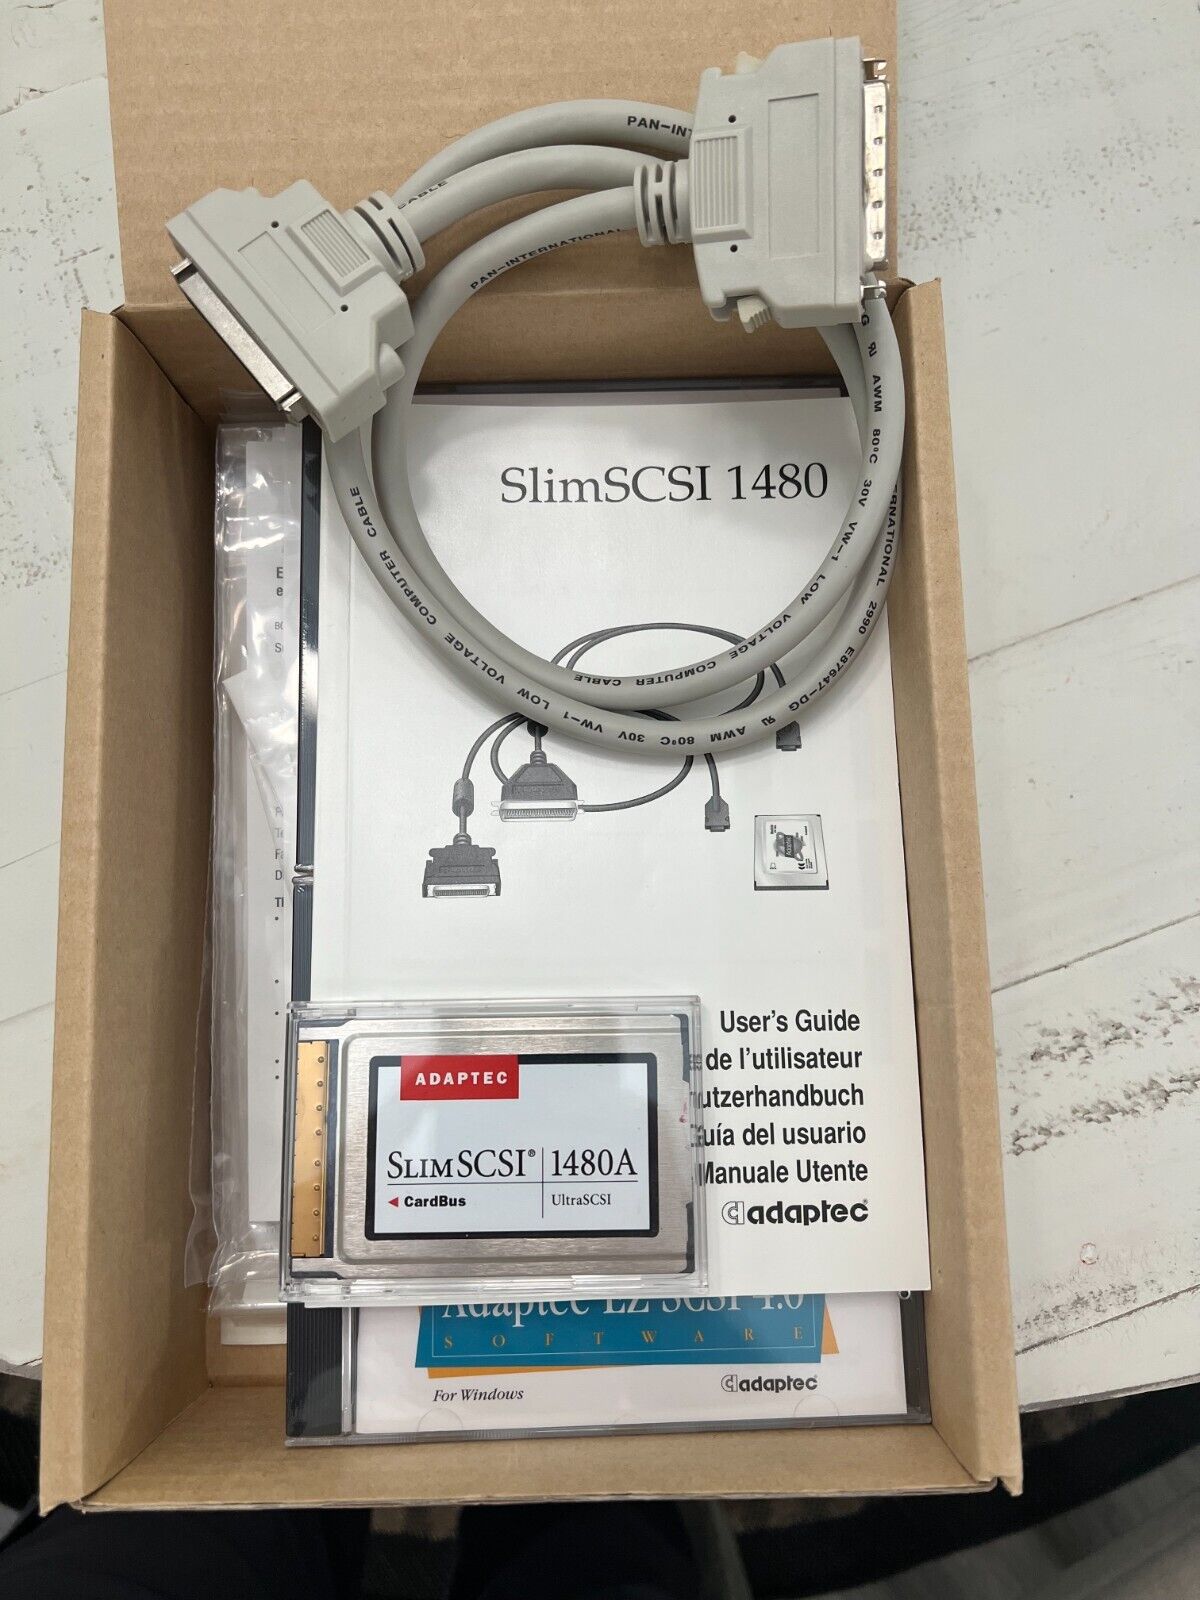 Adaptec Slimscsi Apa-1480a Cardbus To Ultra Scsi Adapter With Cable, Box, Cds